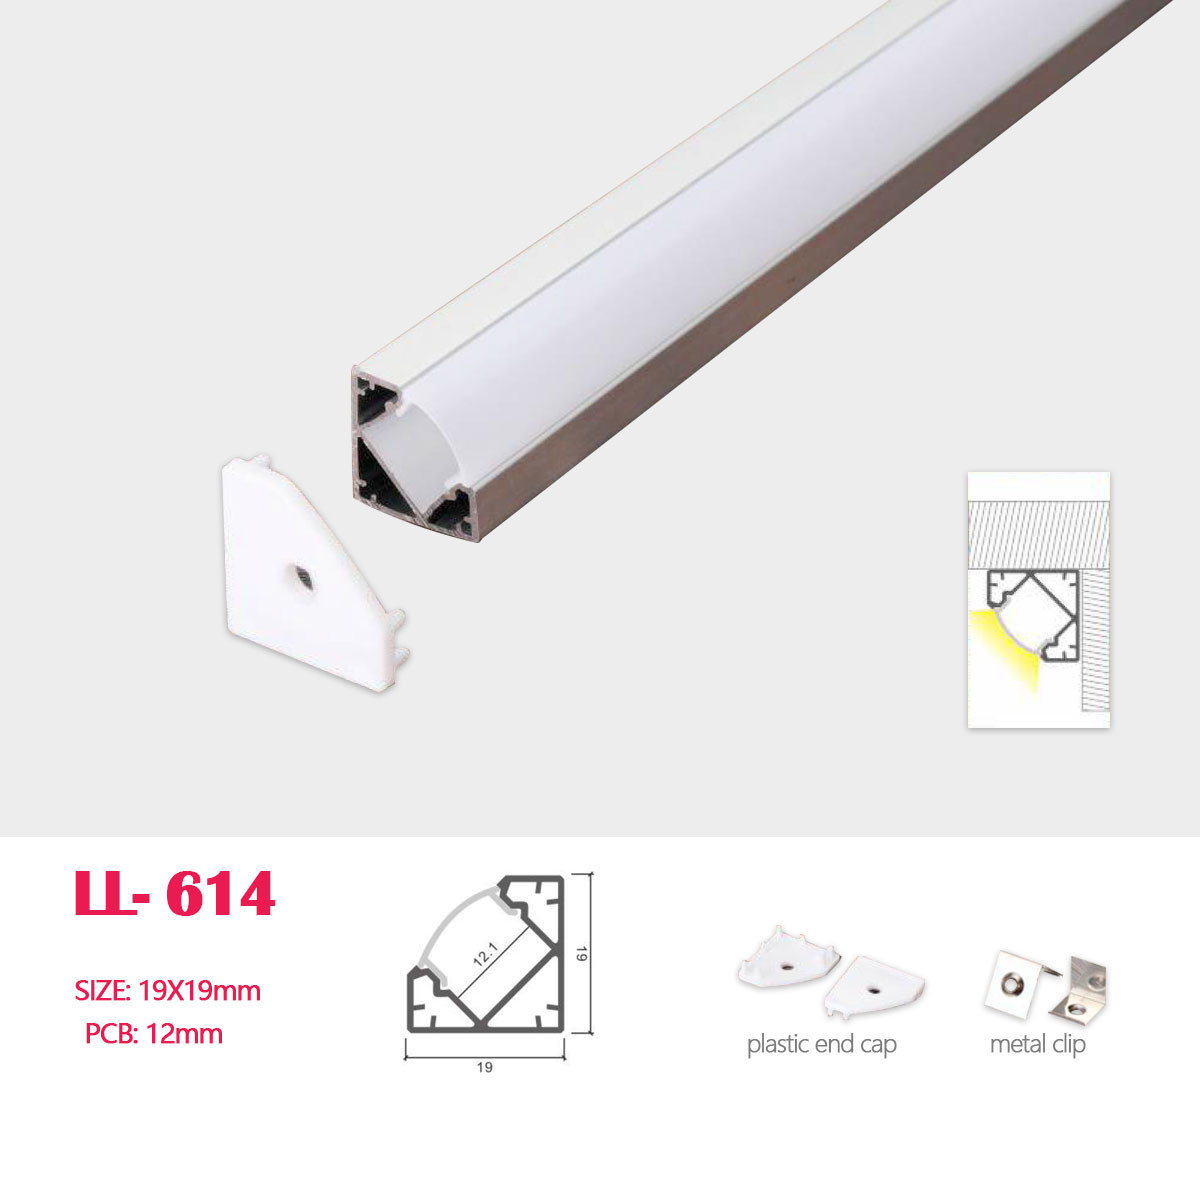  1M (3.28FT) 19MM*19MM V-slot LED Aluminum Profile with  Small Flat Cover,with End Caps and Mounting Clips for Corner Mounted /  Joint LED Strip Lighting